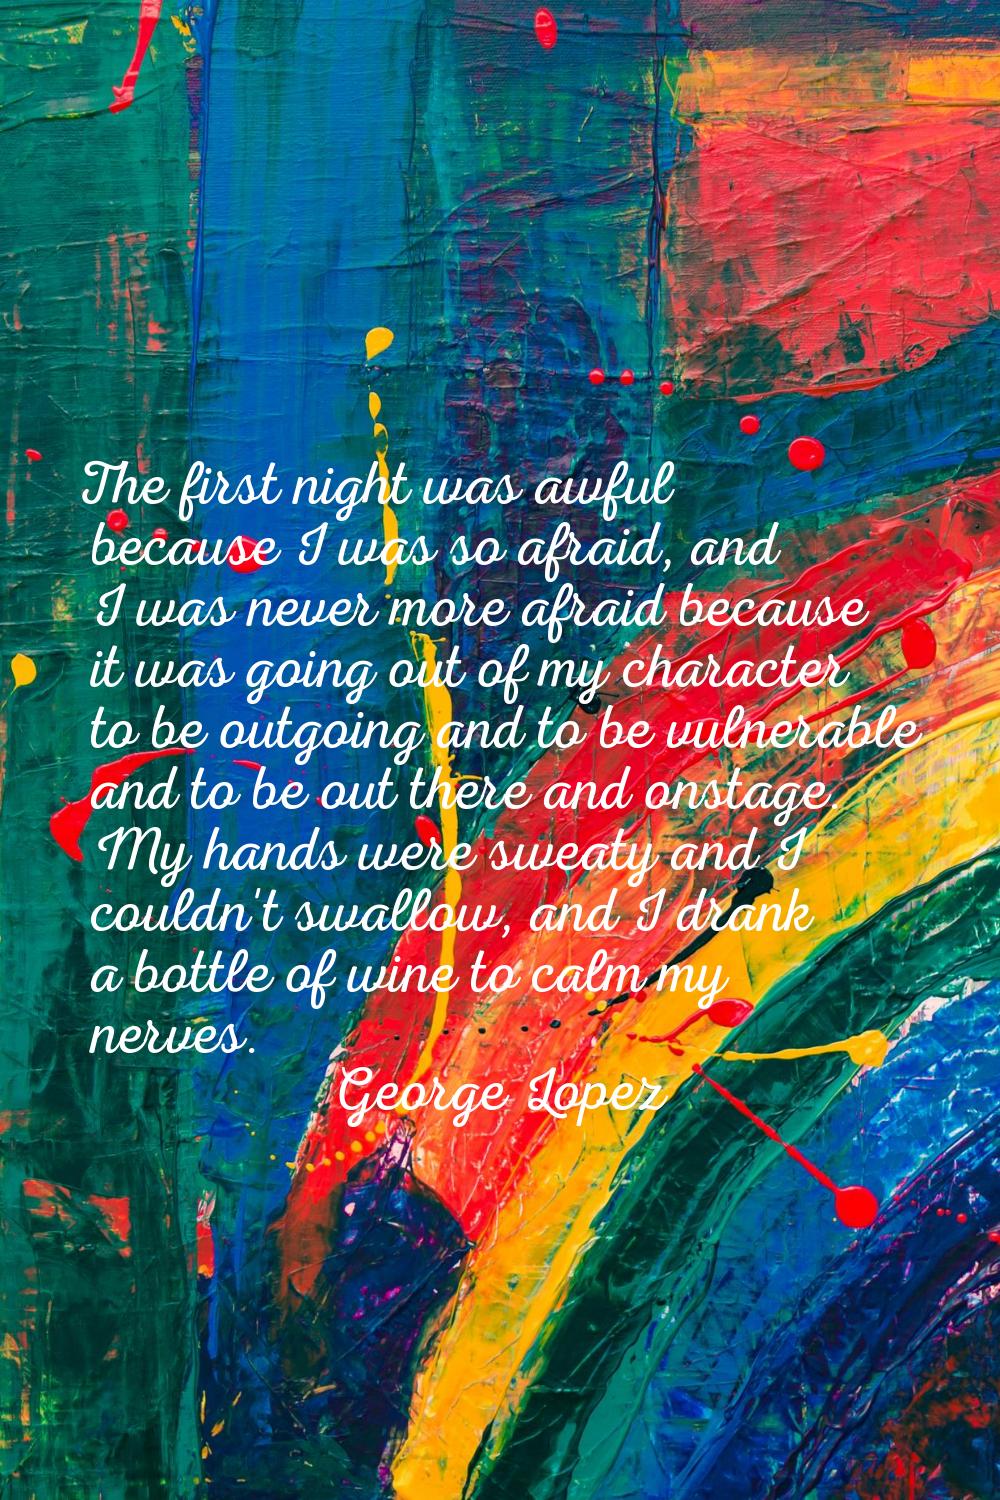 The first night was awful because I was so afraid, and I was never more afraid because it was going